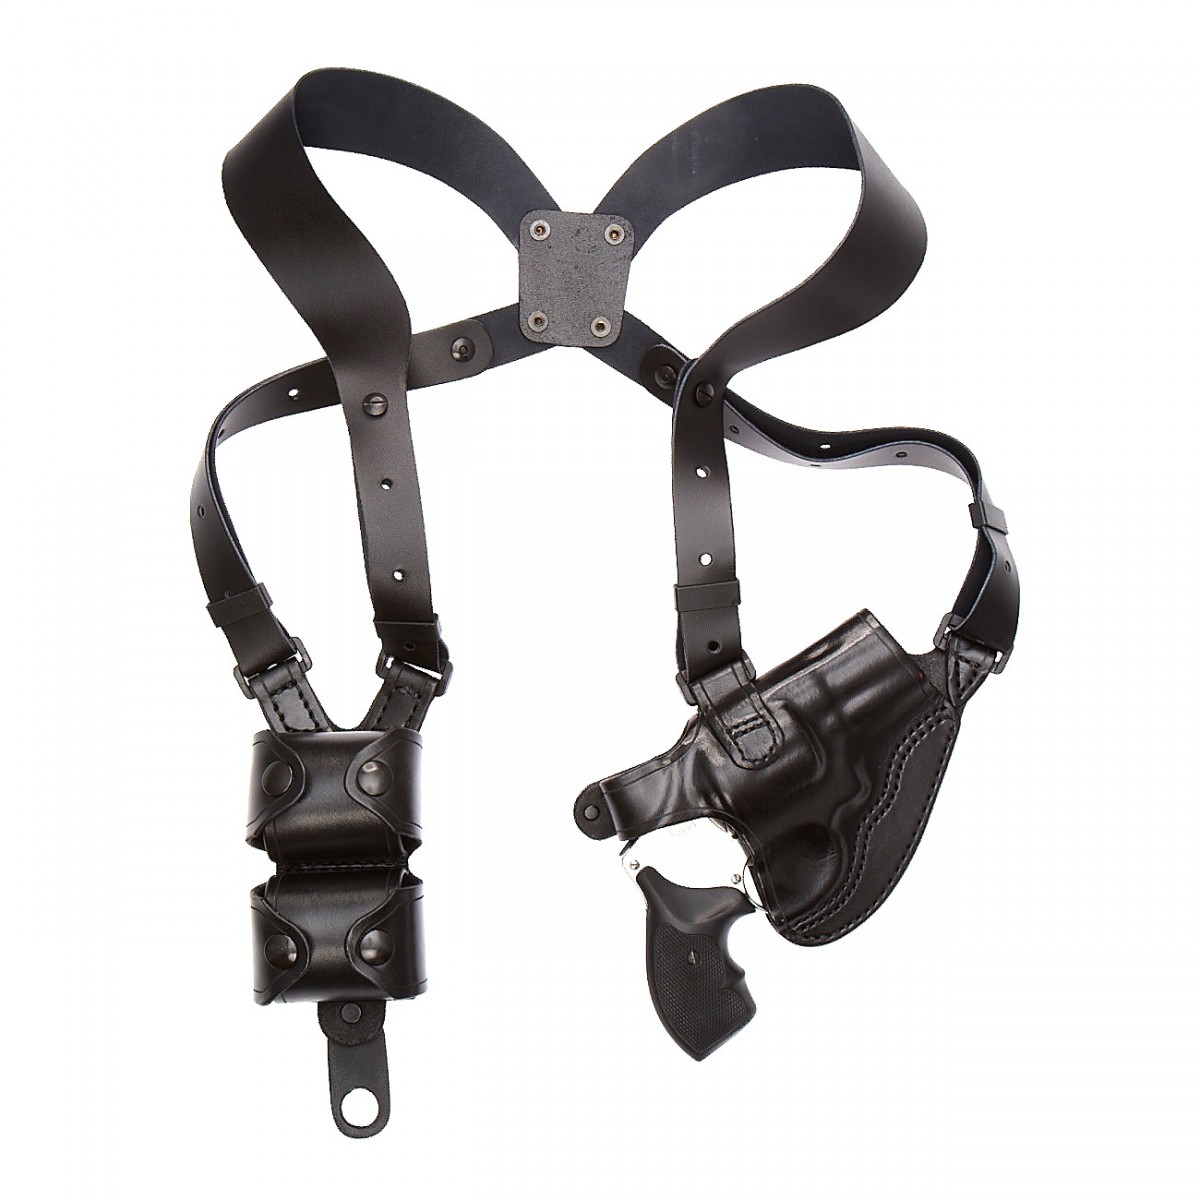 Pro-Tech Outdoors Vertical Shoulder Holster Fits All Medium Frame Revolvers with 3 to 4 Barrel 